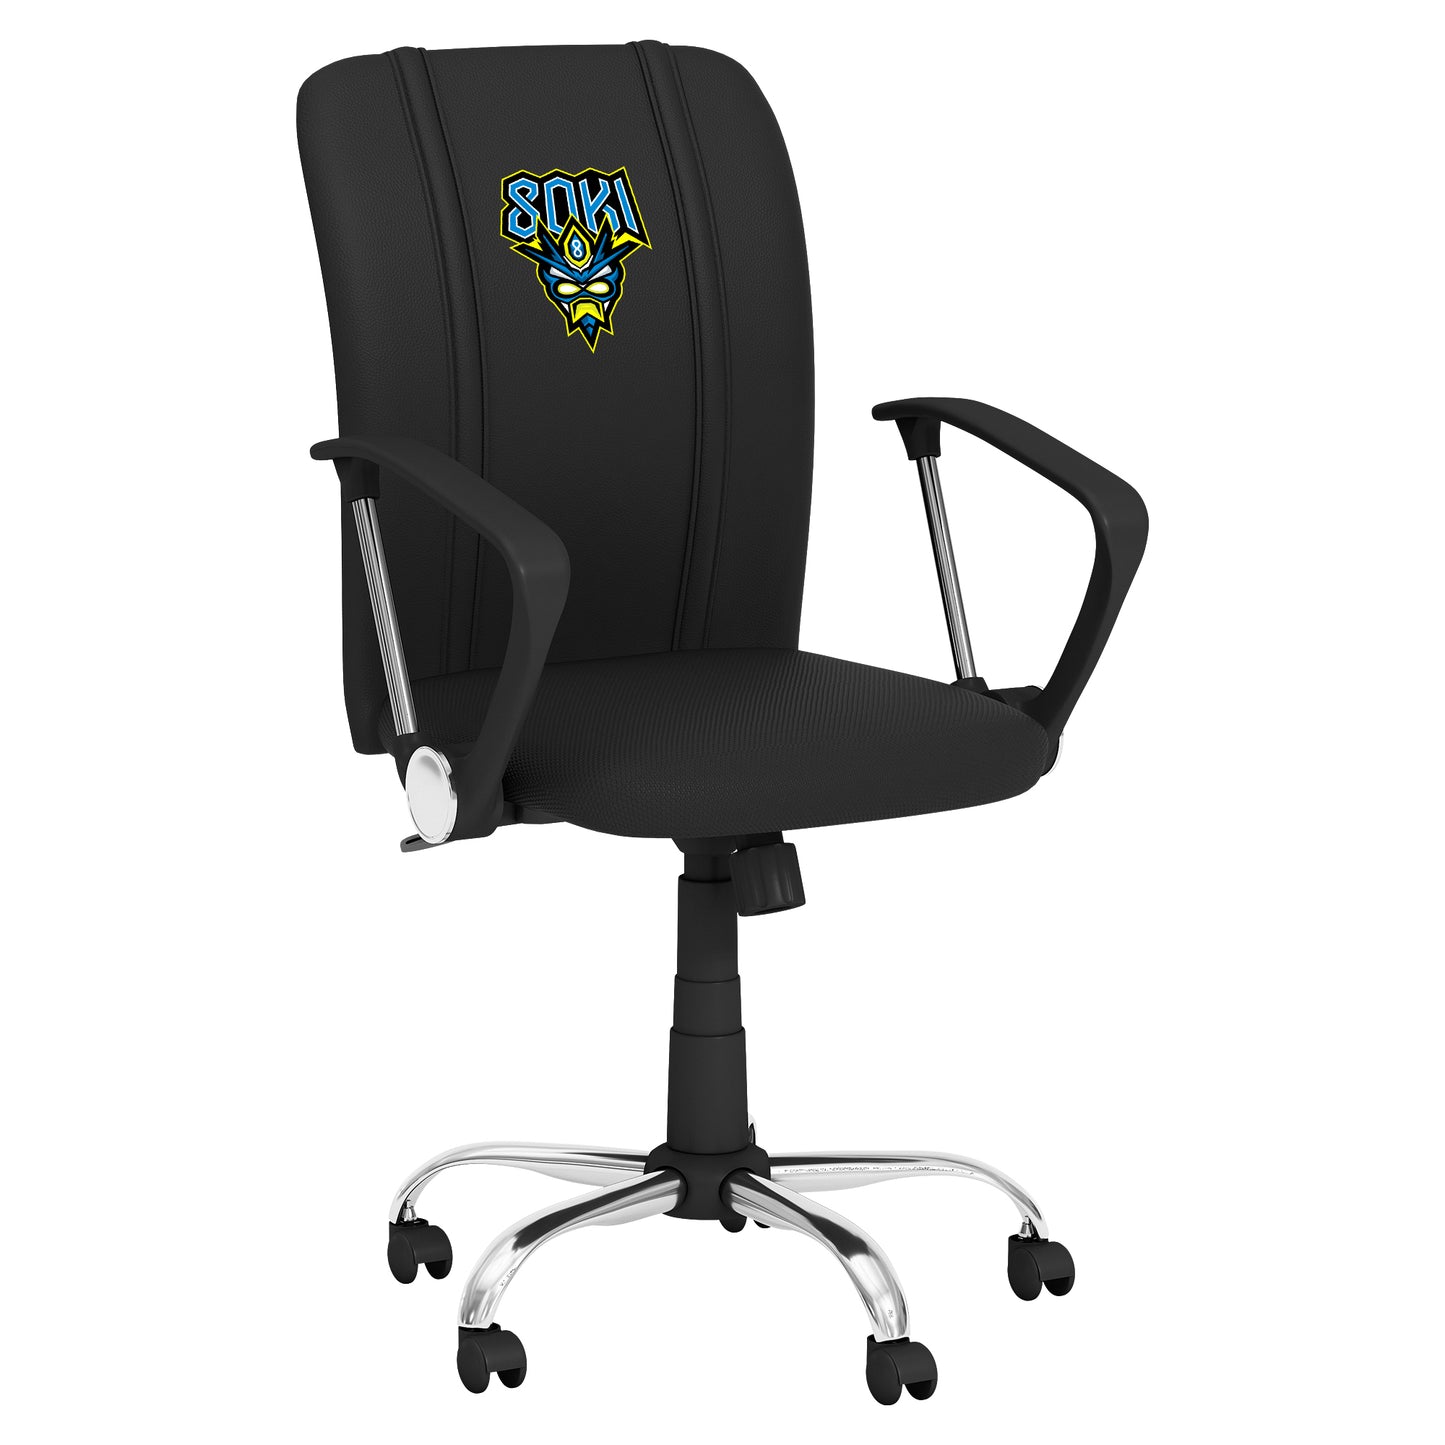 Curve Task Chair with 8oki Primary Logo